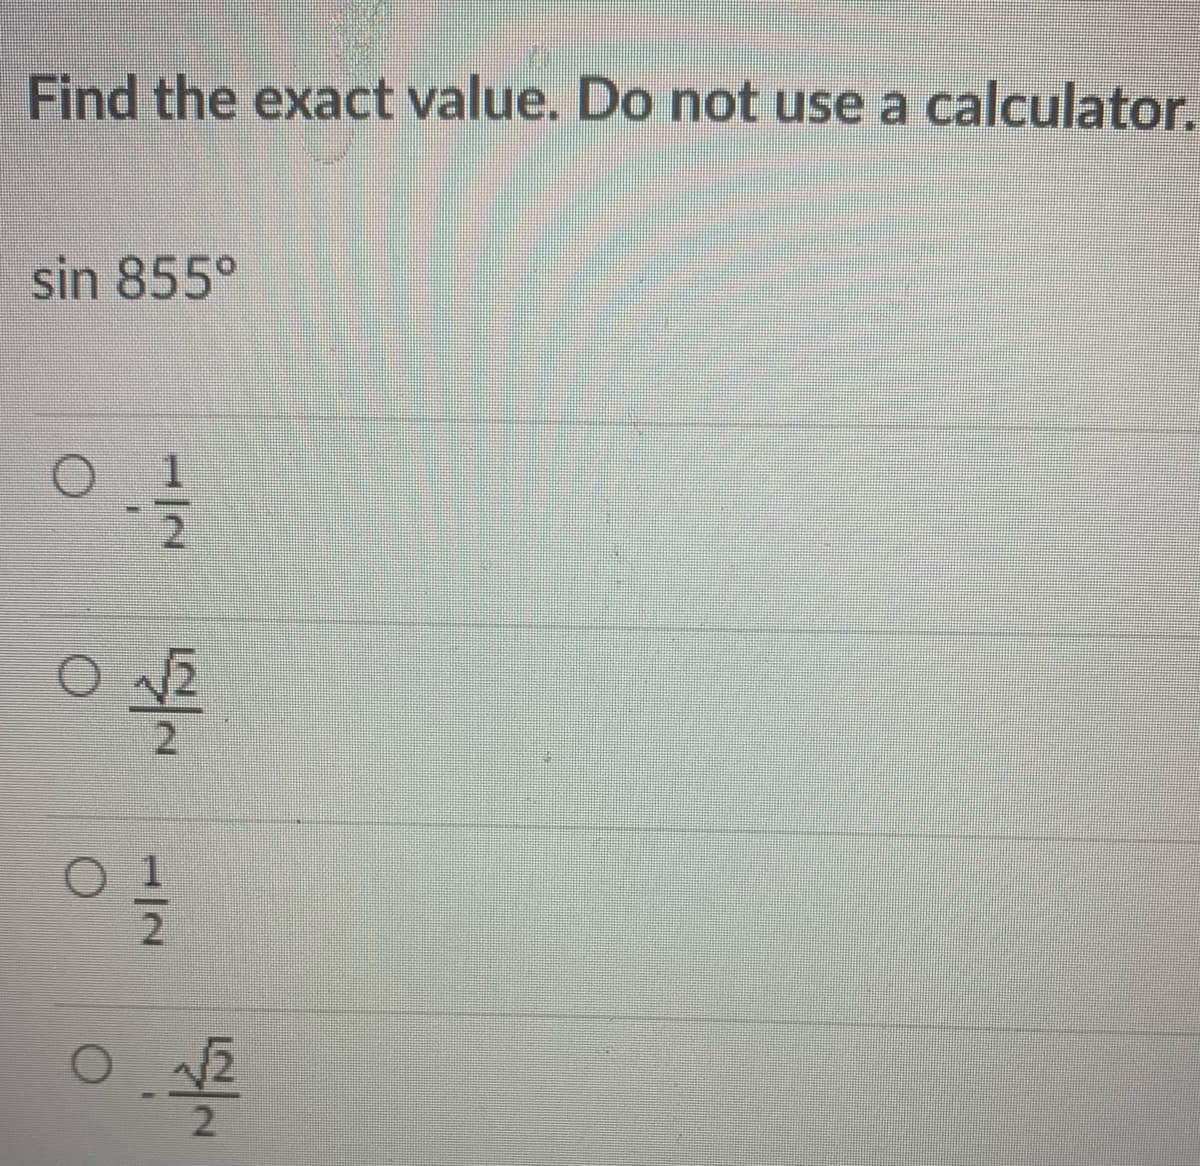 Find the exact value. Do not use a calculator.
sin 855°
2.
1/2
1/2
